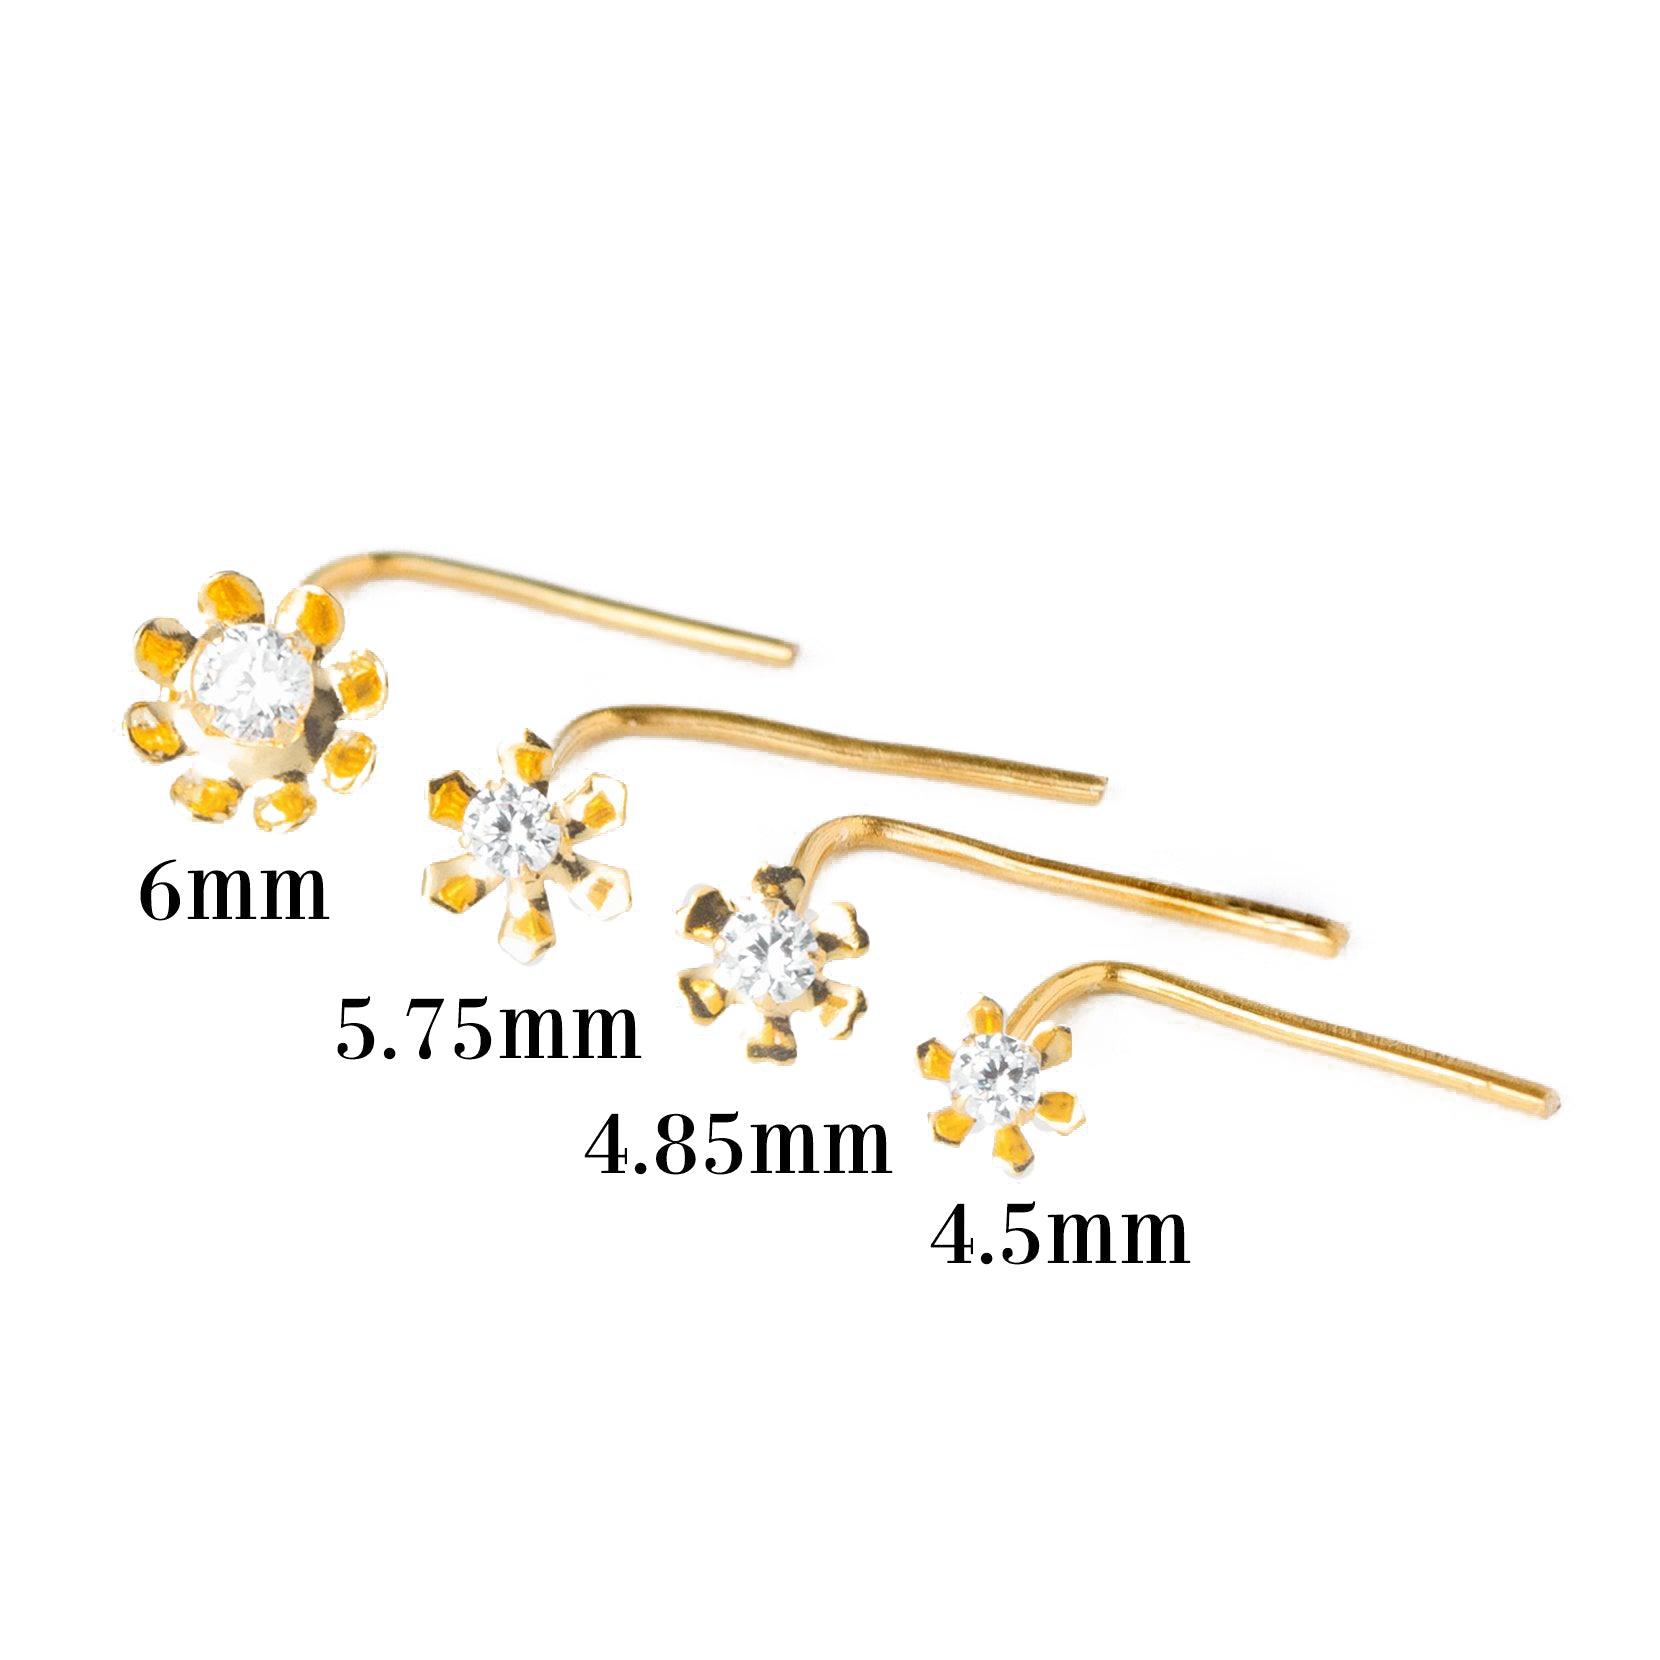 18ct Yellow Gold L Shape Back Nose Stud set with Cubic Zirconia in a Flower Design (4.5mm - 6mm) NIP-4-080